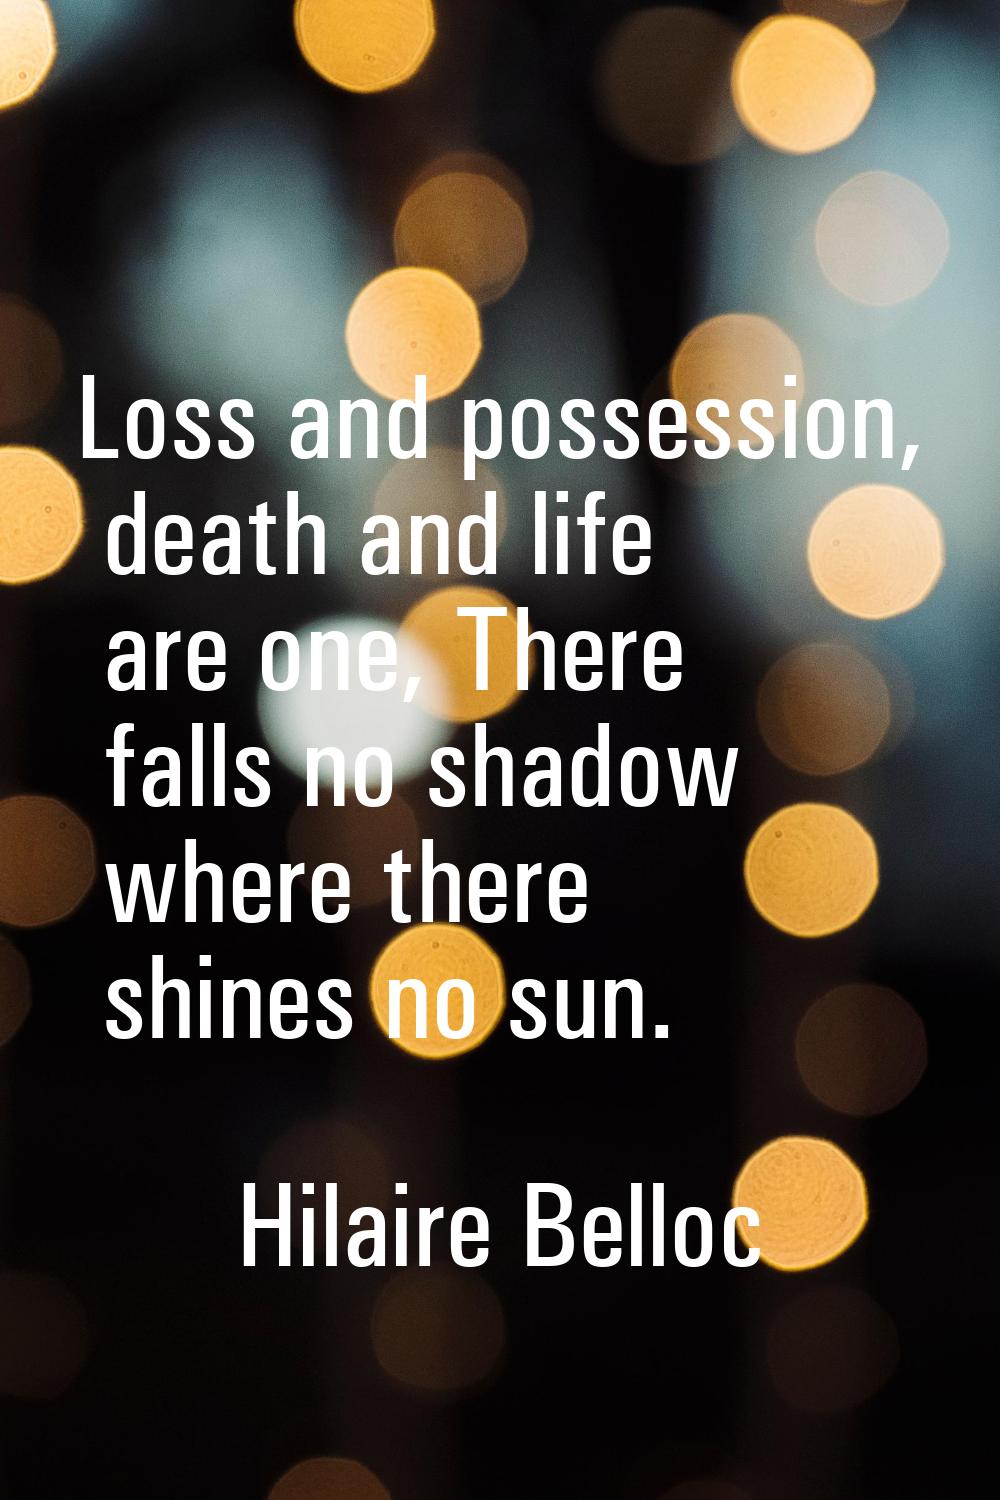 Loss and possession, death and life are one, There falls no shadow where there shines no sun.